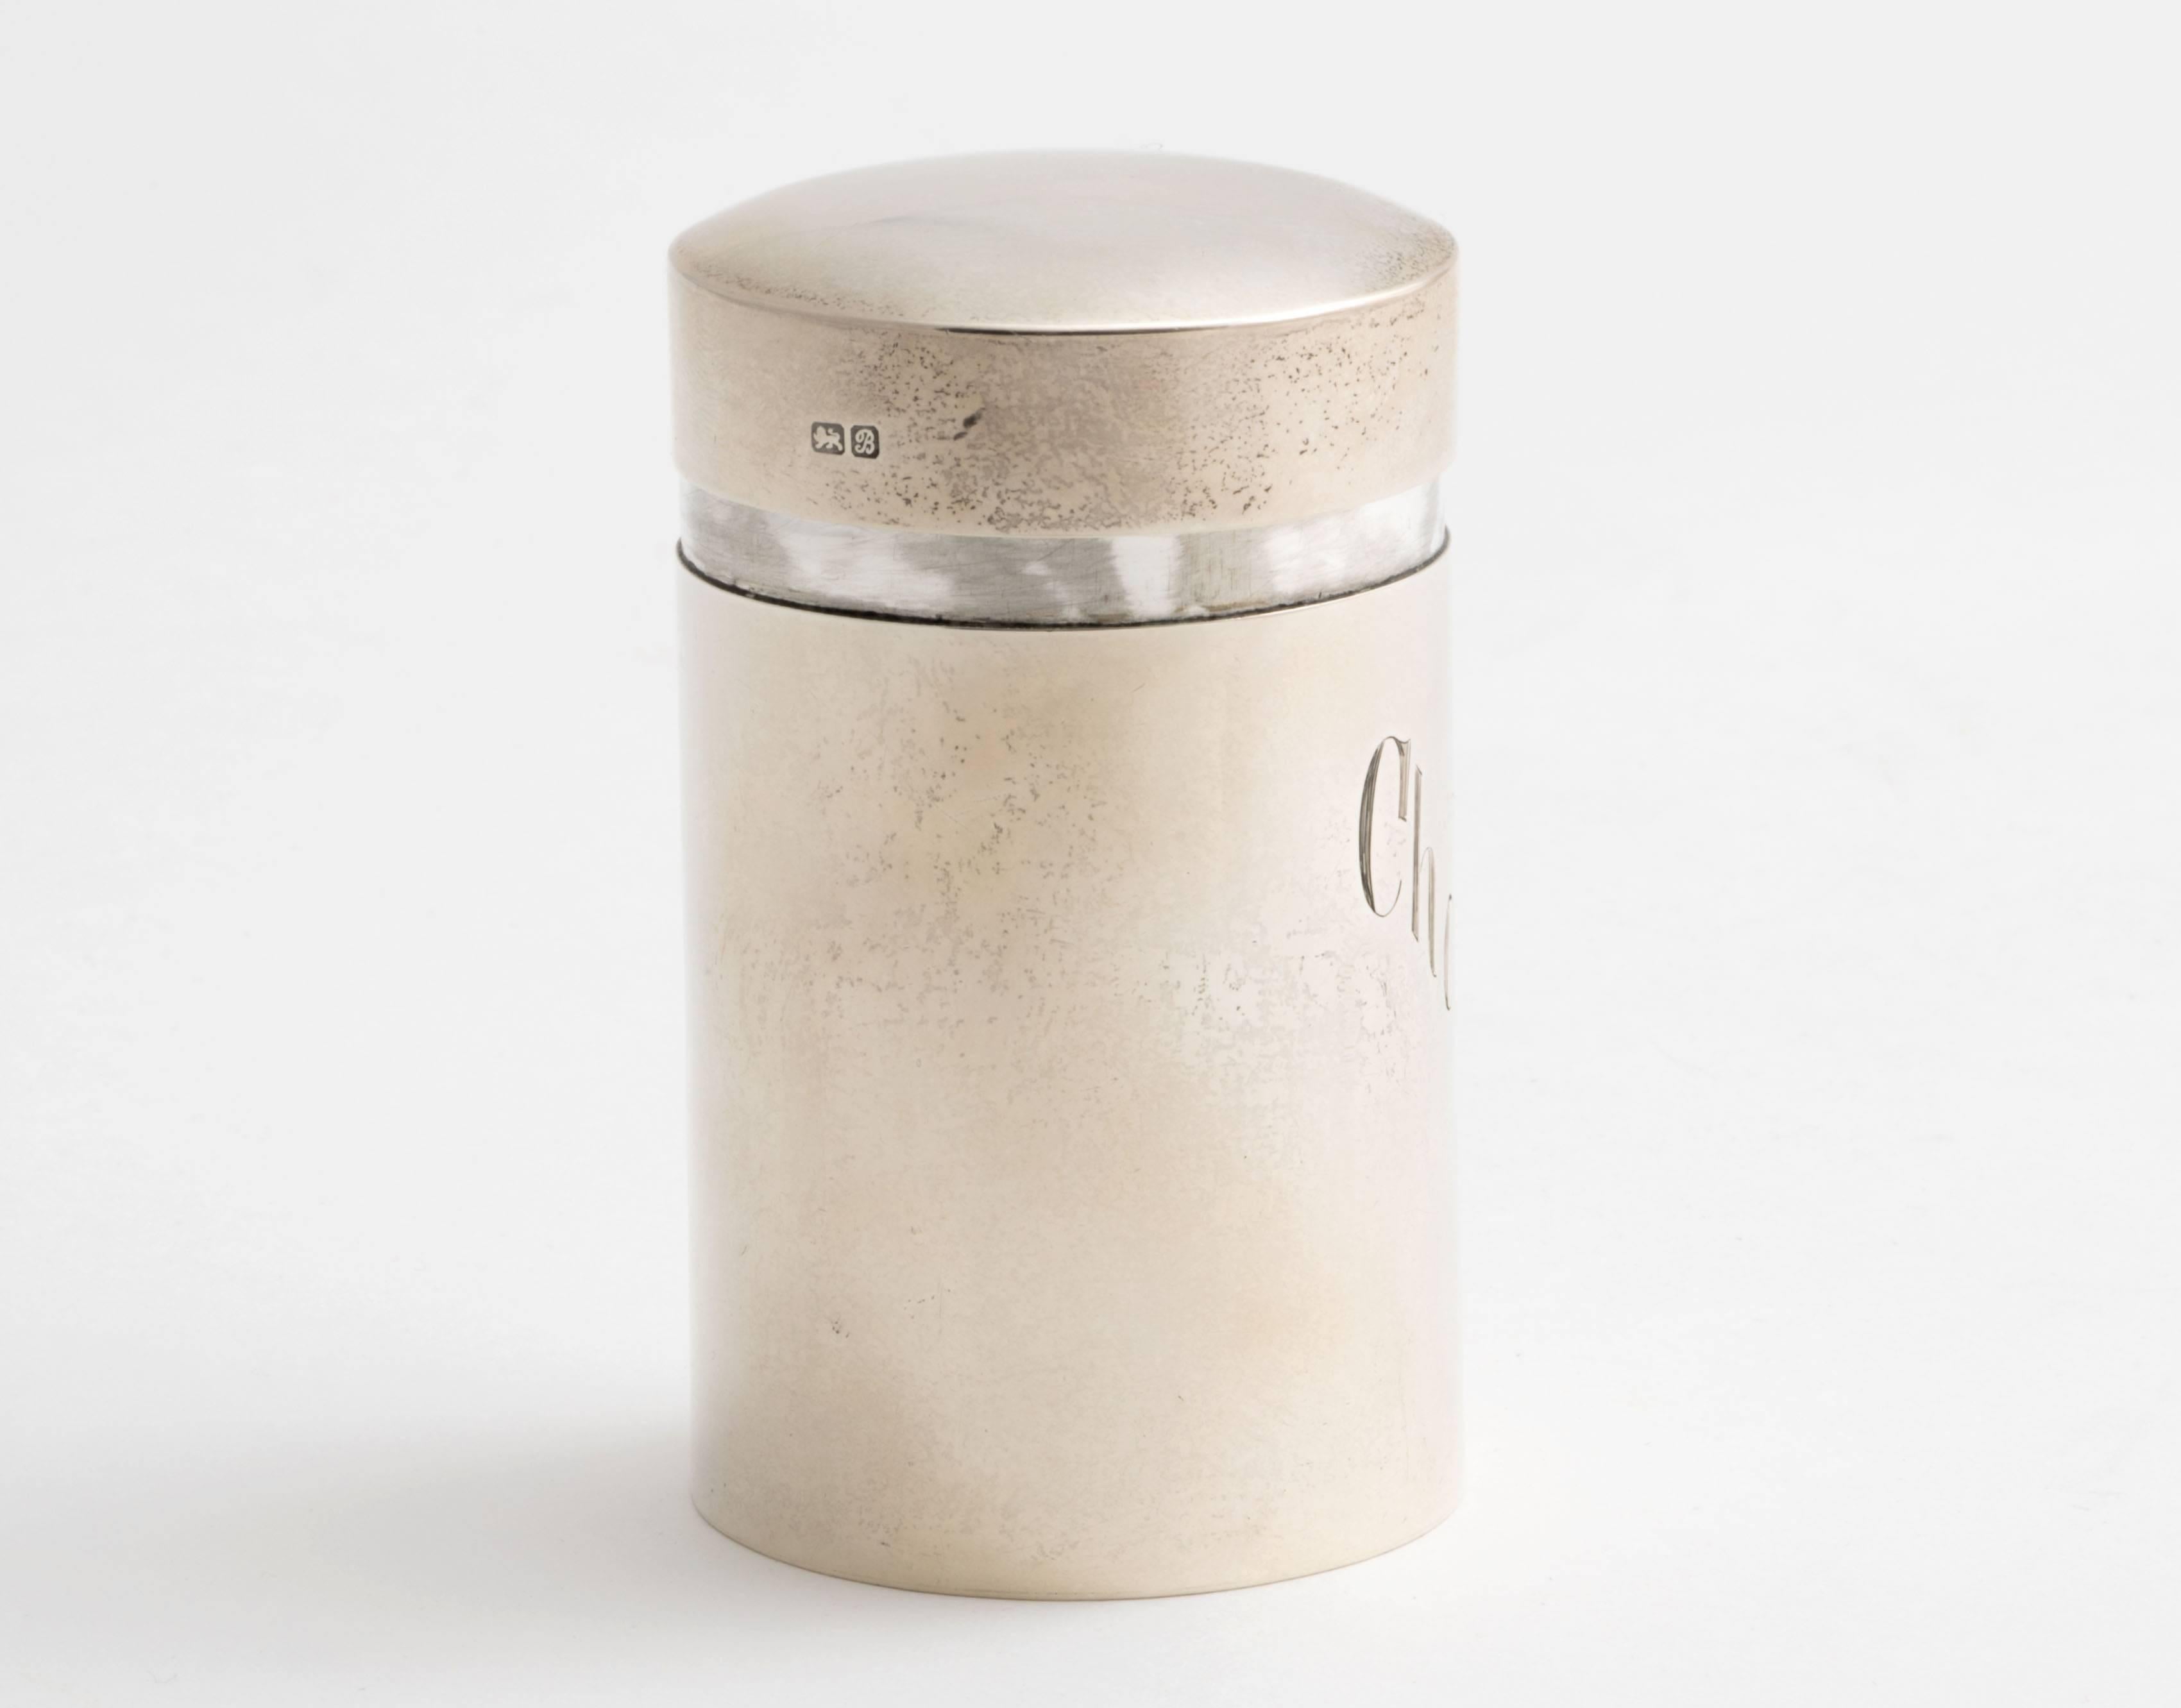 Late Victorian Antique Sterling Silver Chocolate Canister by Saunders and Shepherd